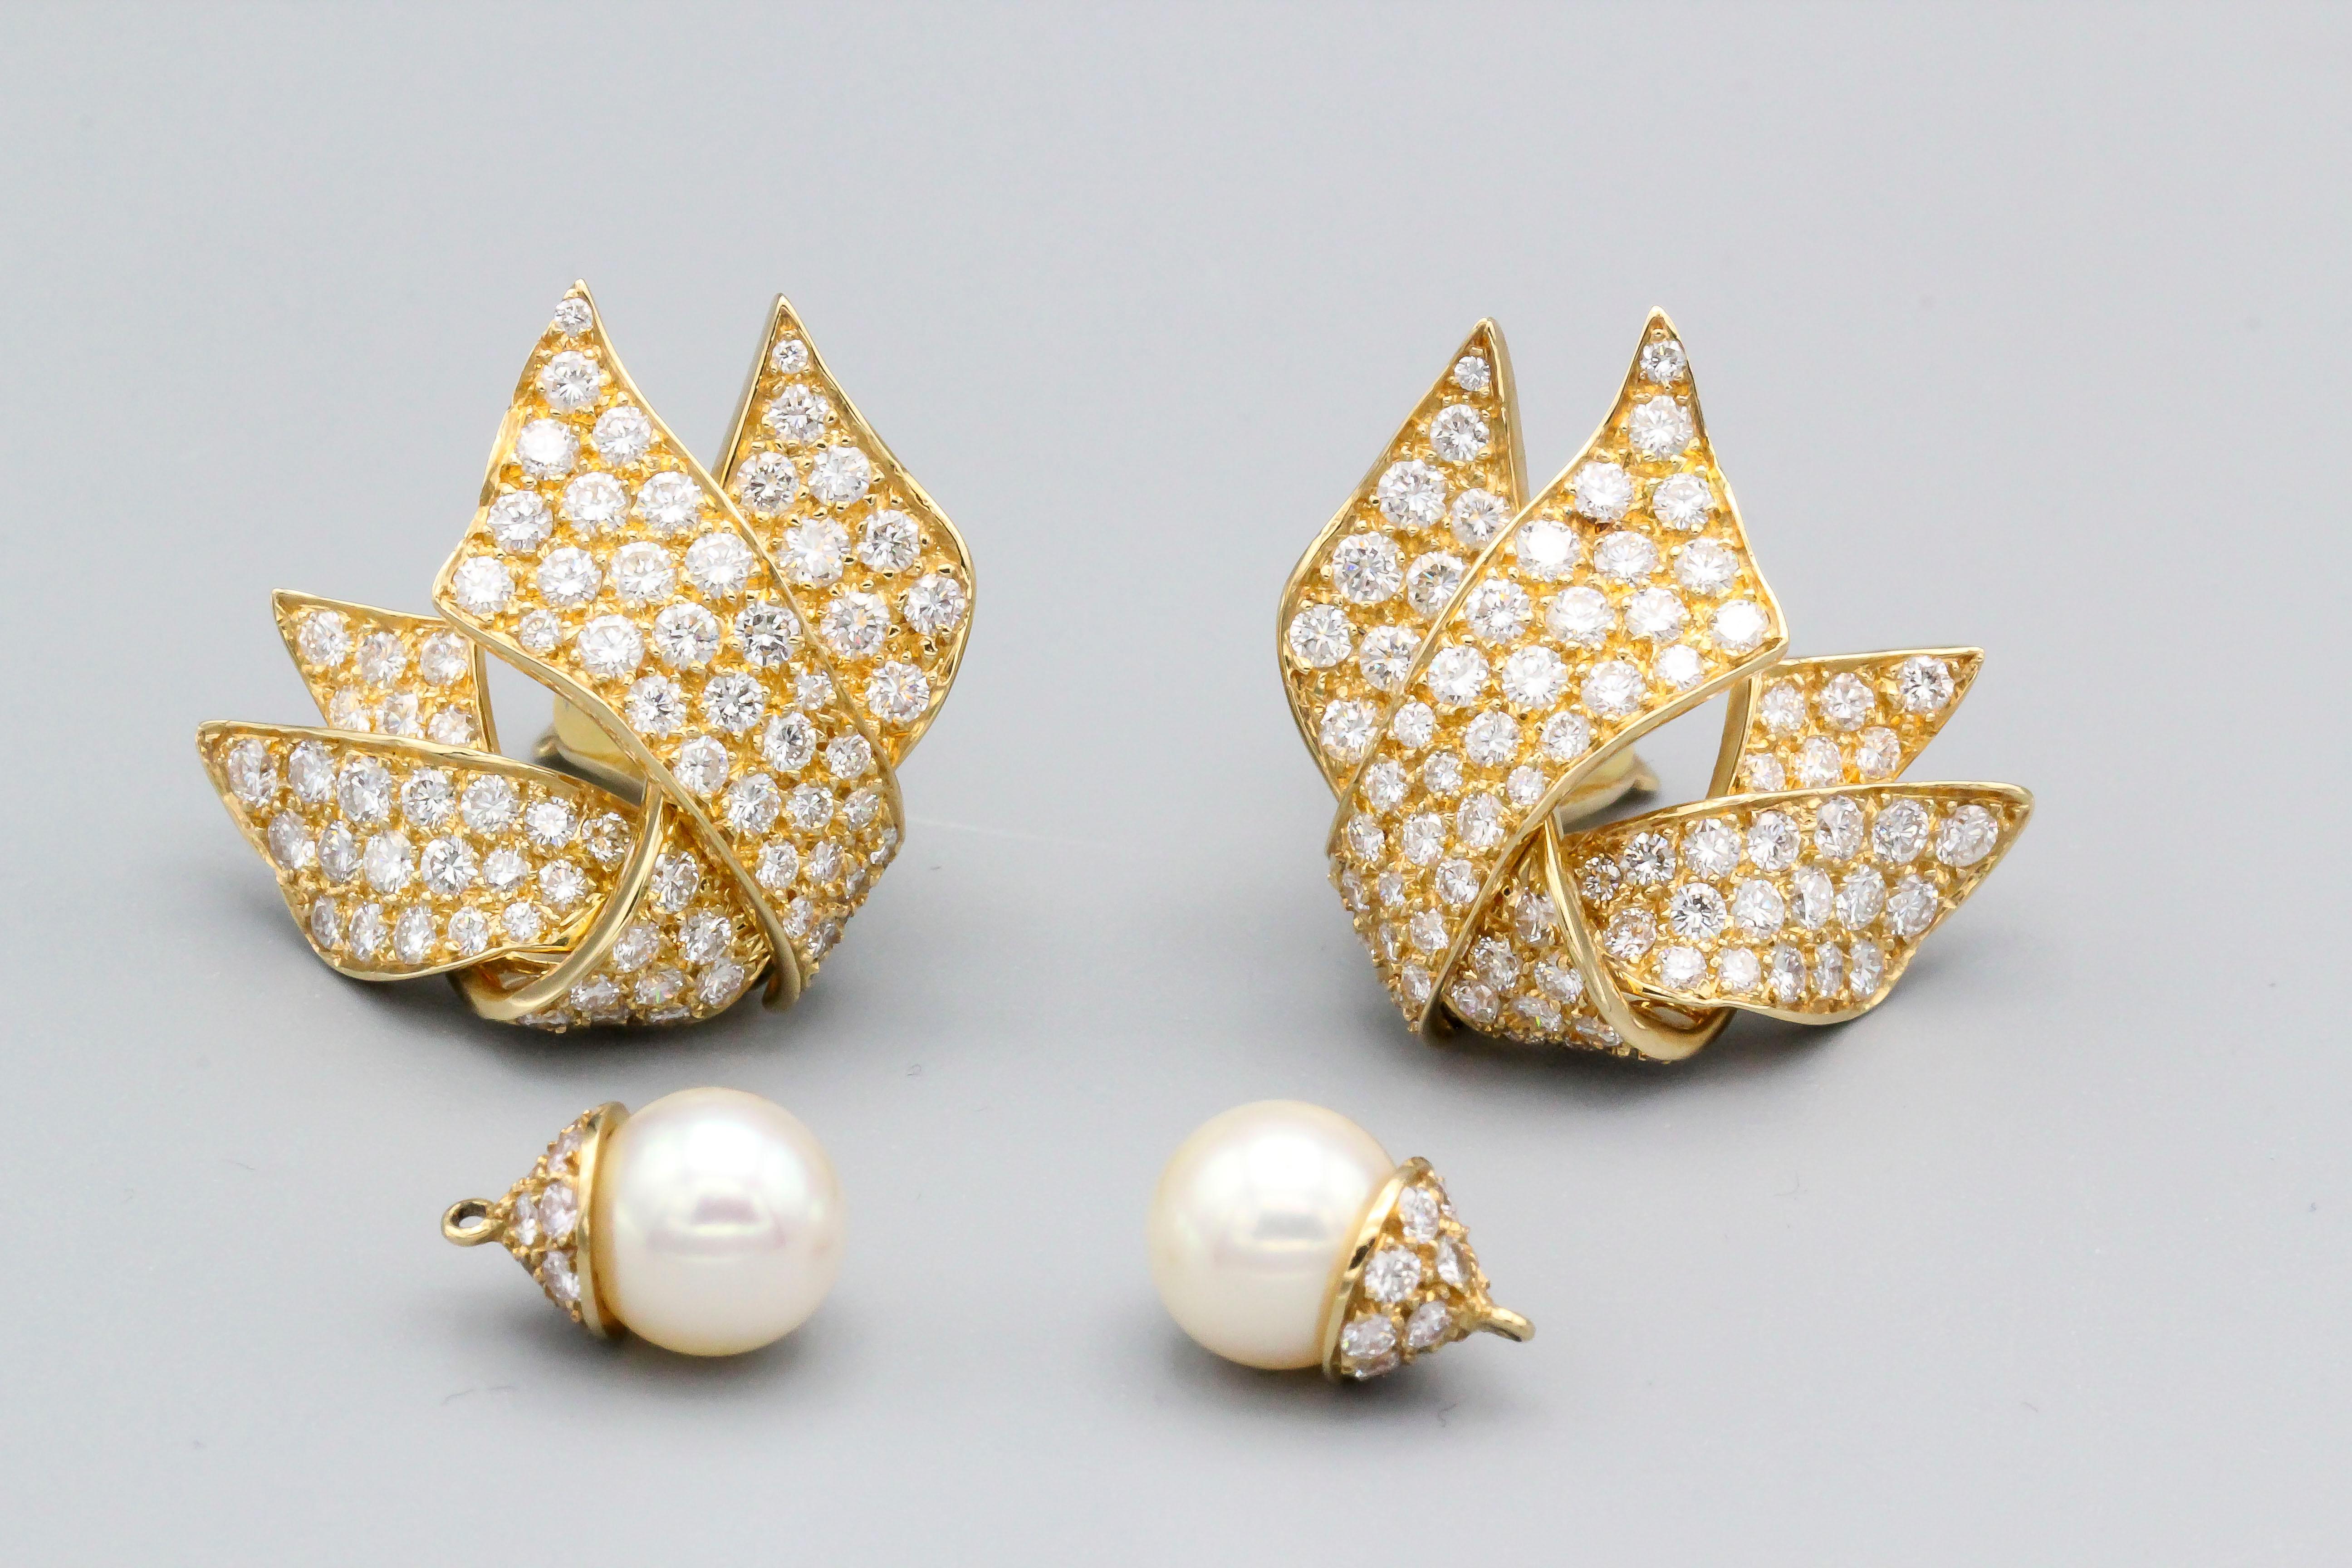 Fine pair of diamond and 18K gold earrings with a removable pearl, by Chanel. Known as 